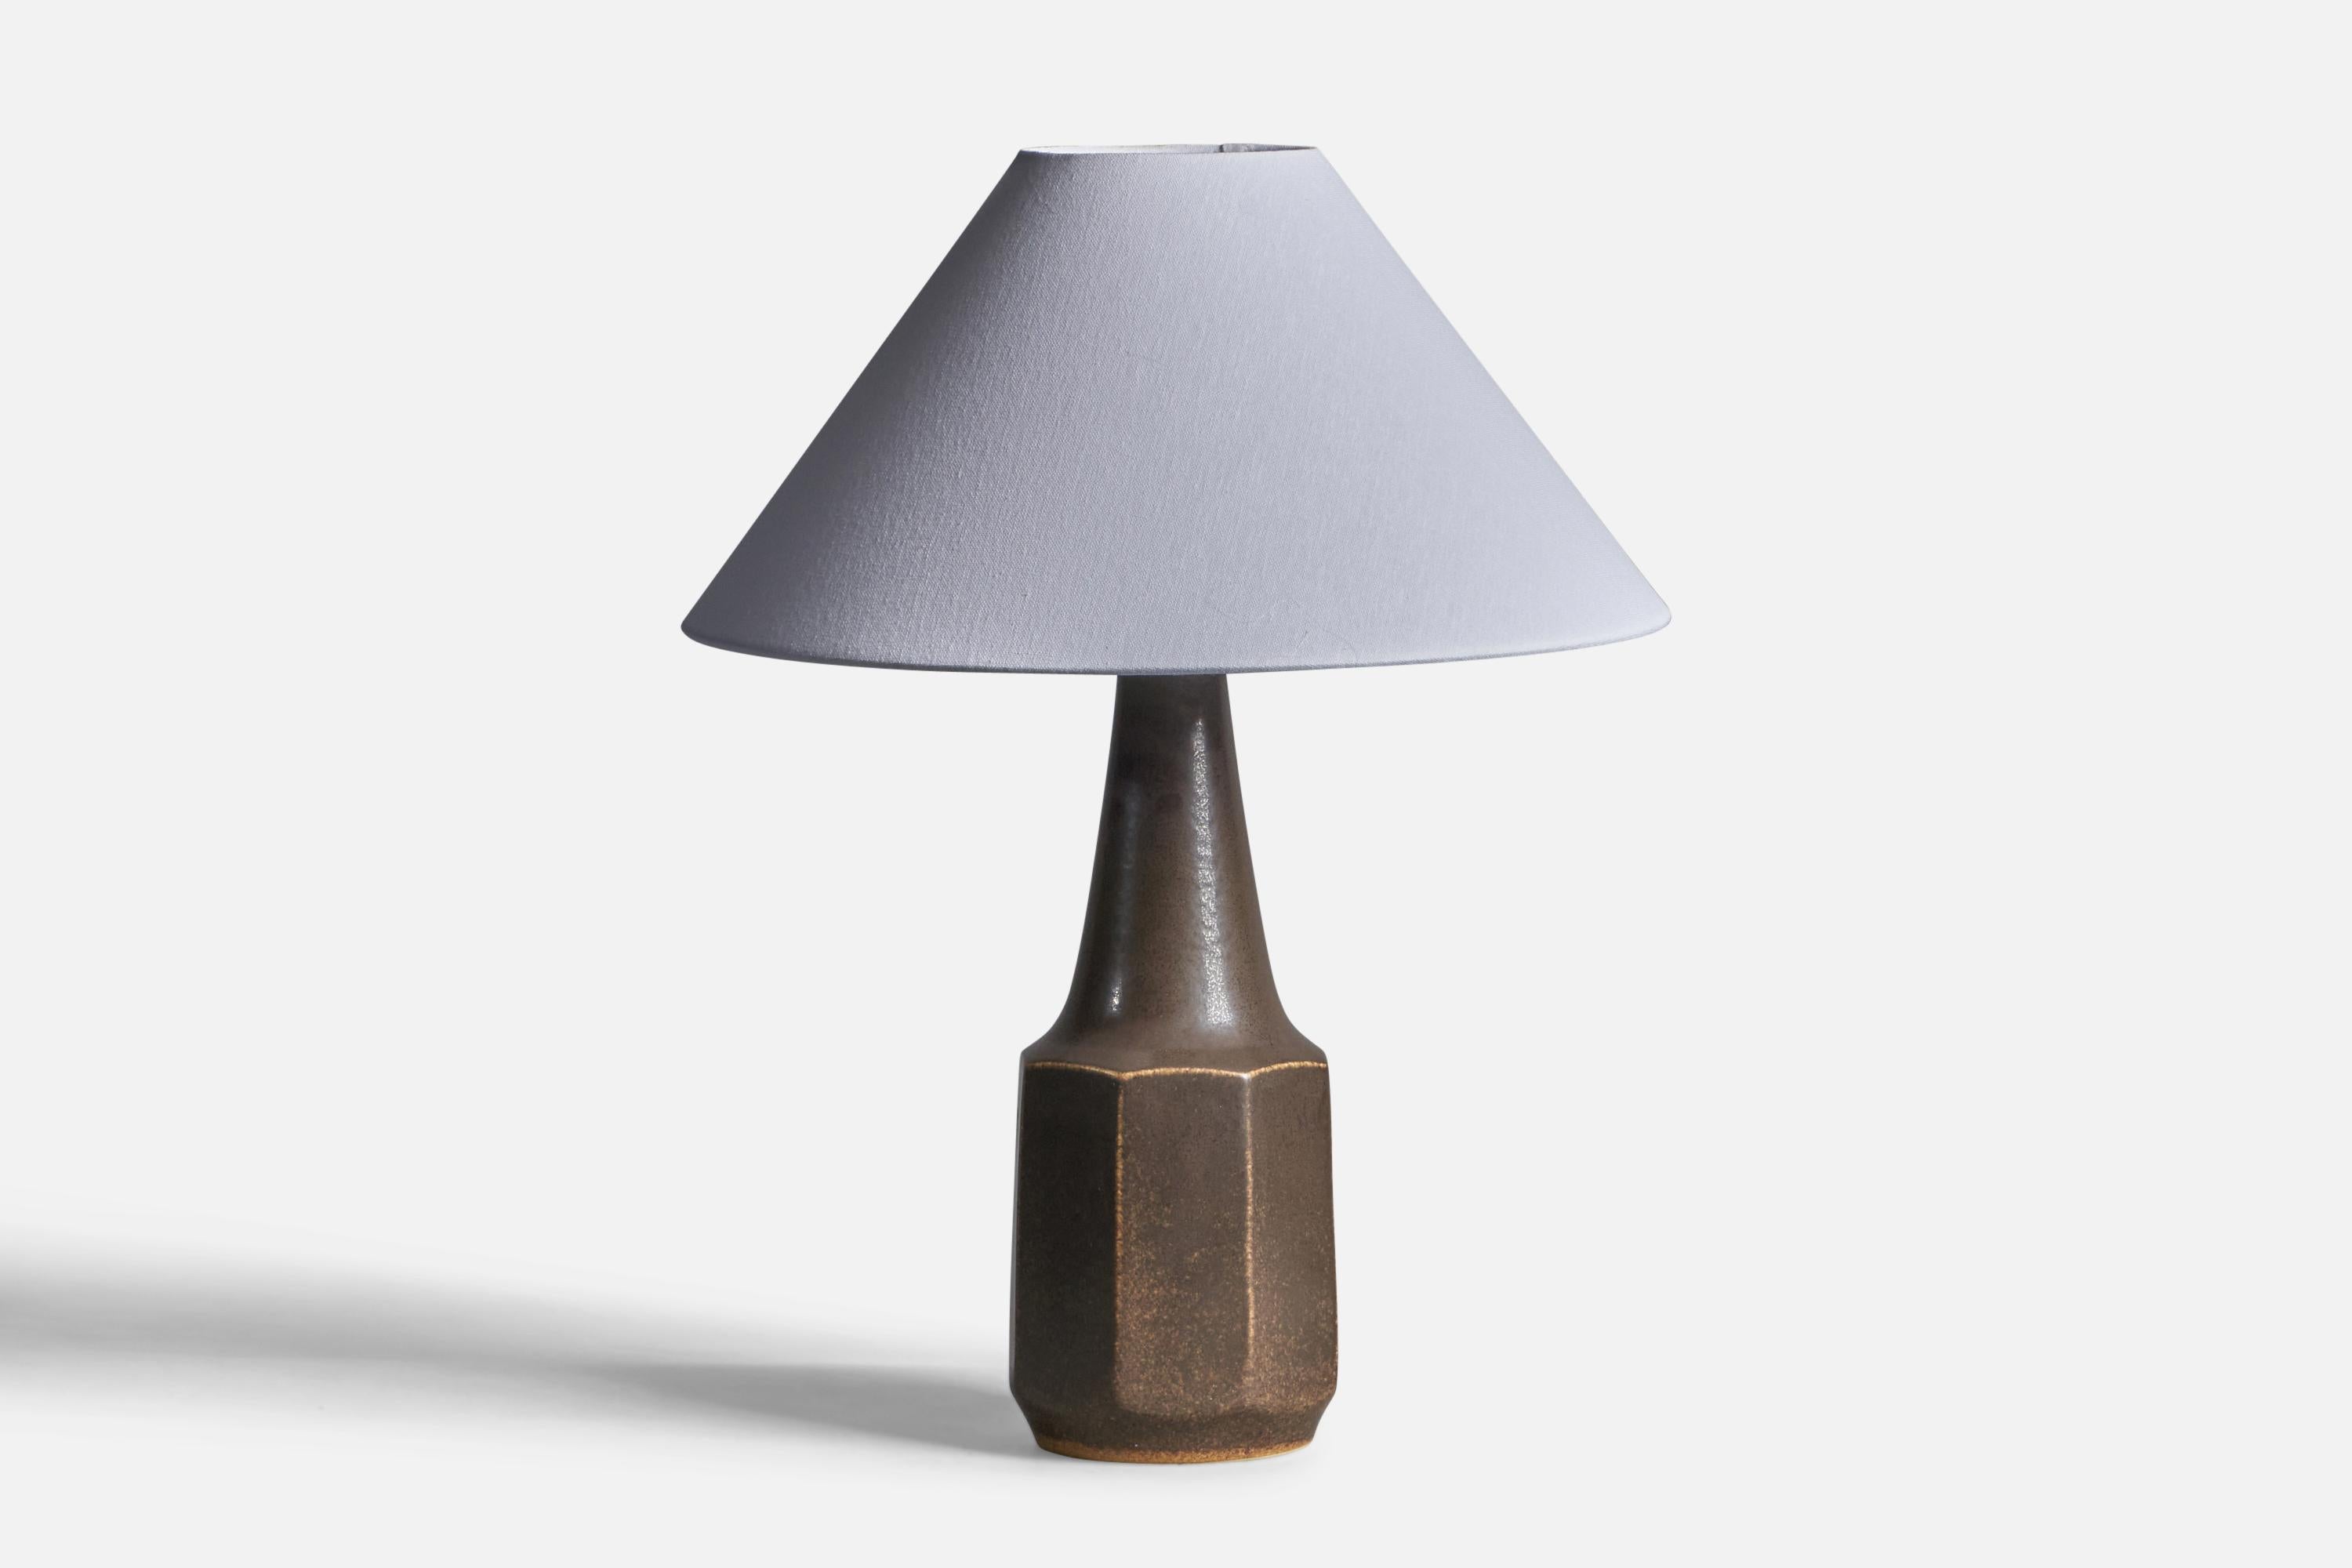 A brown-glazed stoneware table lamp, designed by Marianne Stark and produced by Michael Andersen, Bornholm, Denmark, 1960s.

Dimensions of Lamp (inches): 16.4